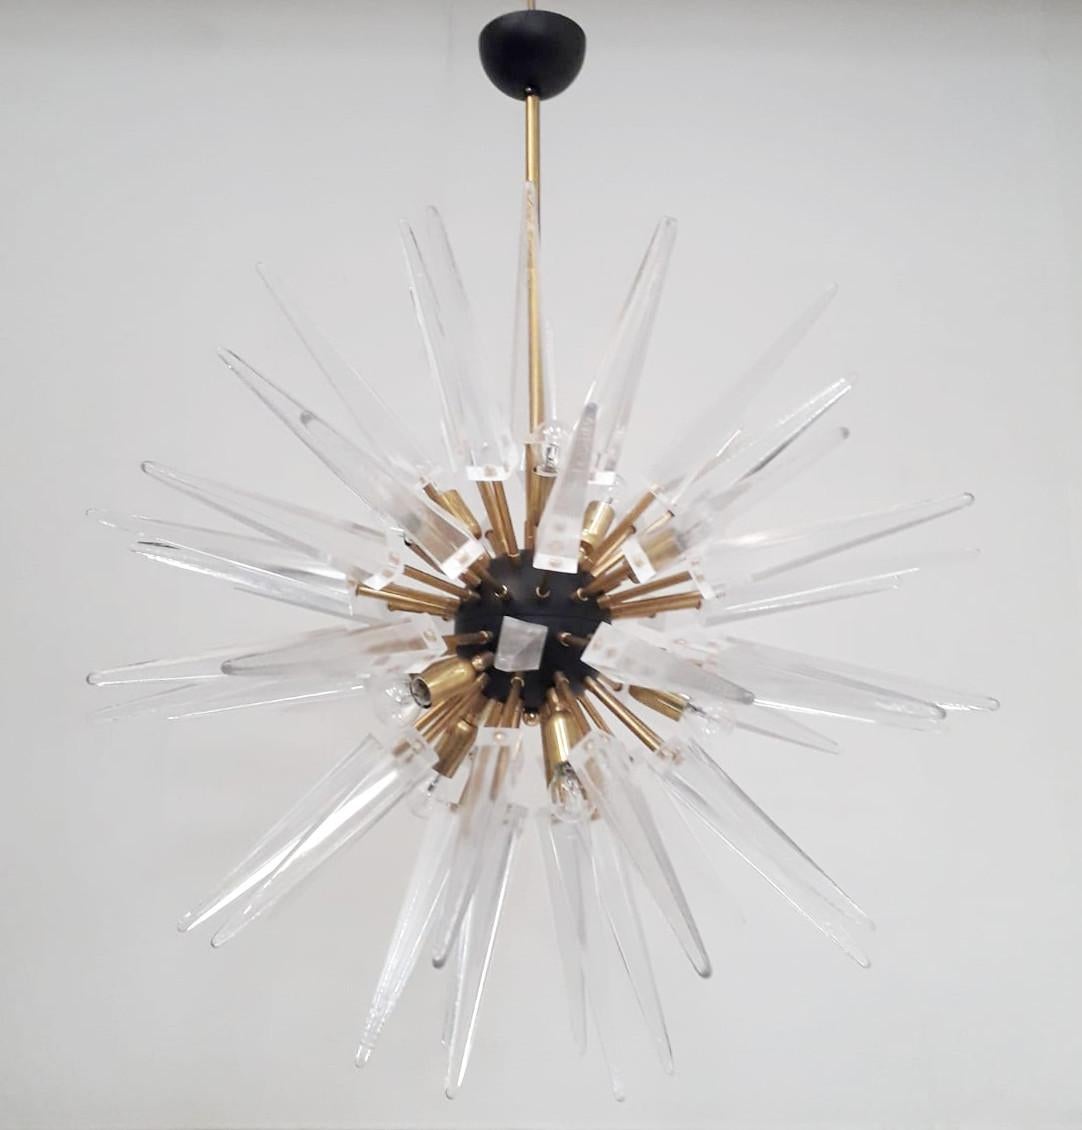 Italian modern sputnik chandelier with clear Murano glass shards spikes, mounted on natural unlacquered brass frame with matte black centre and canopy, designed by Fabio Bergomi for Fabio Ltd / Made in Italy
12 lights / E12 or E14 type / max 40W